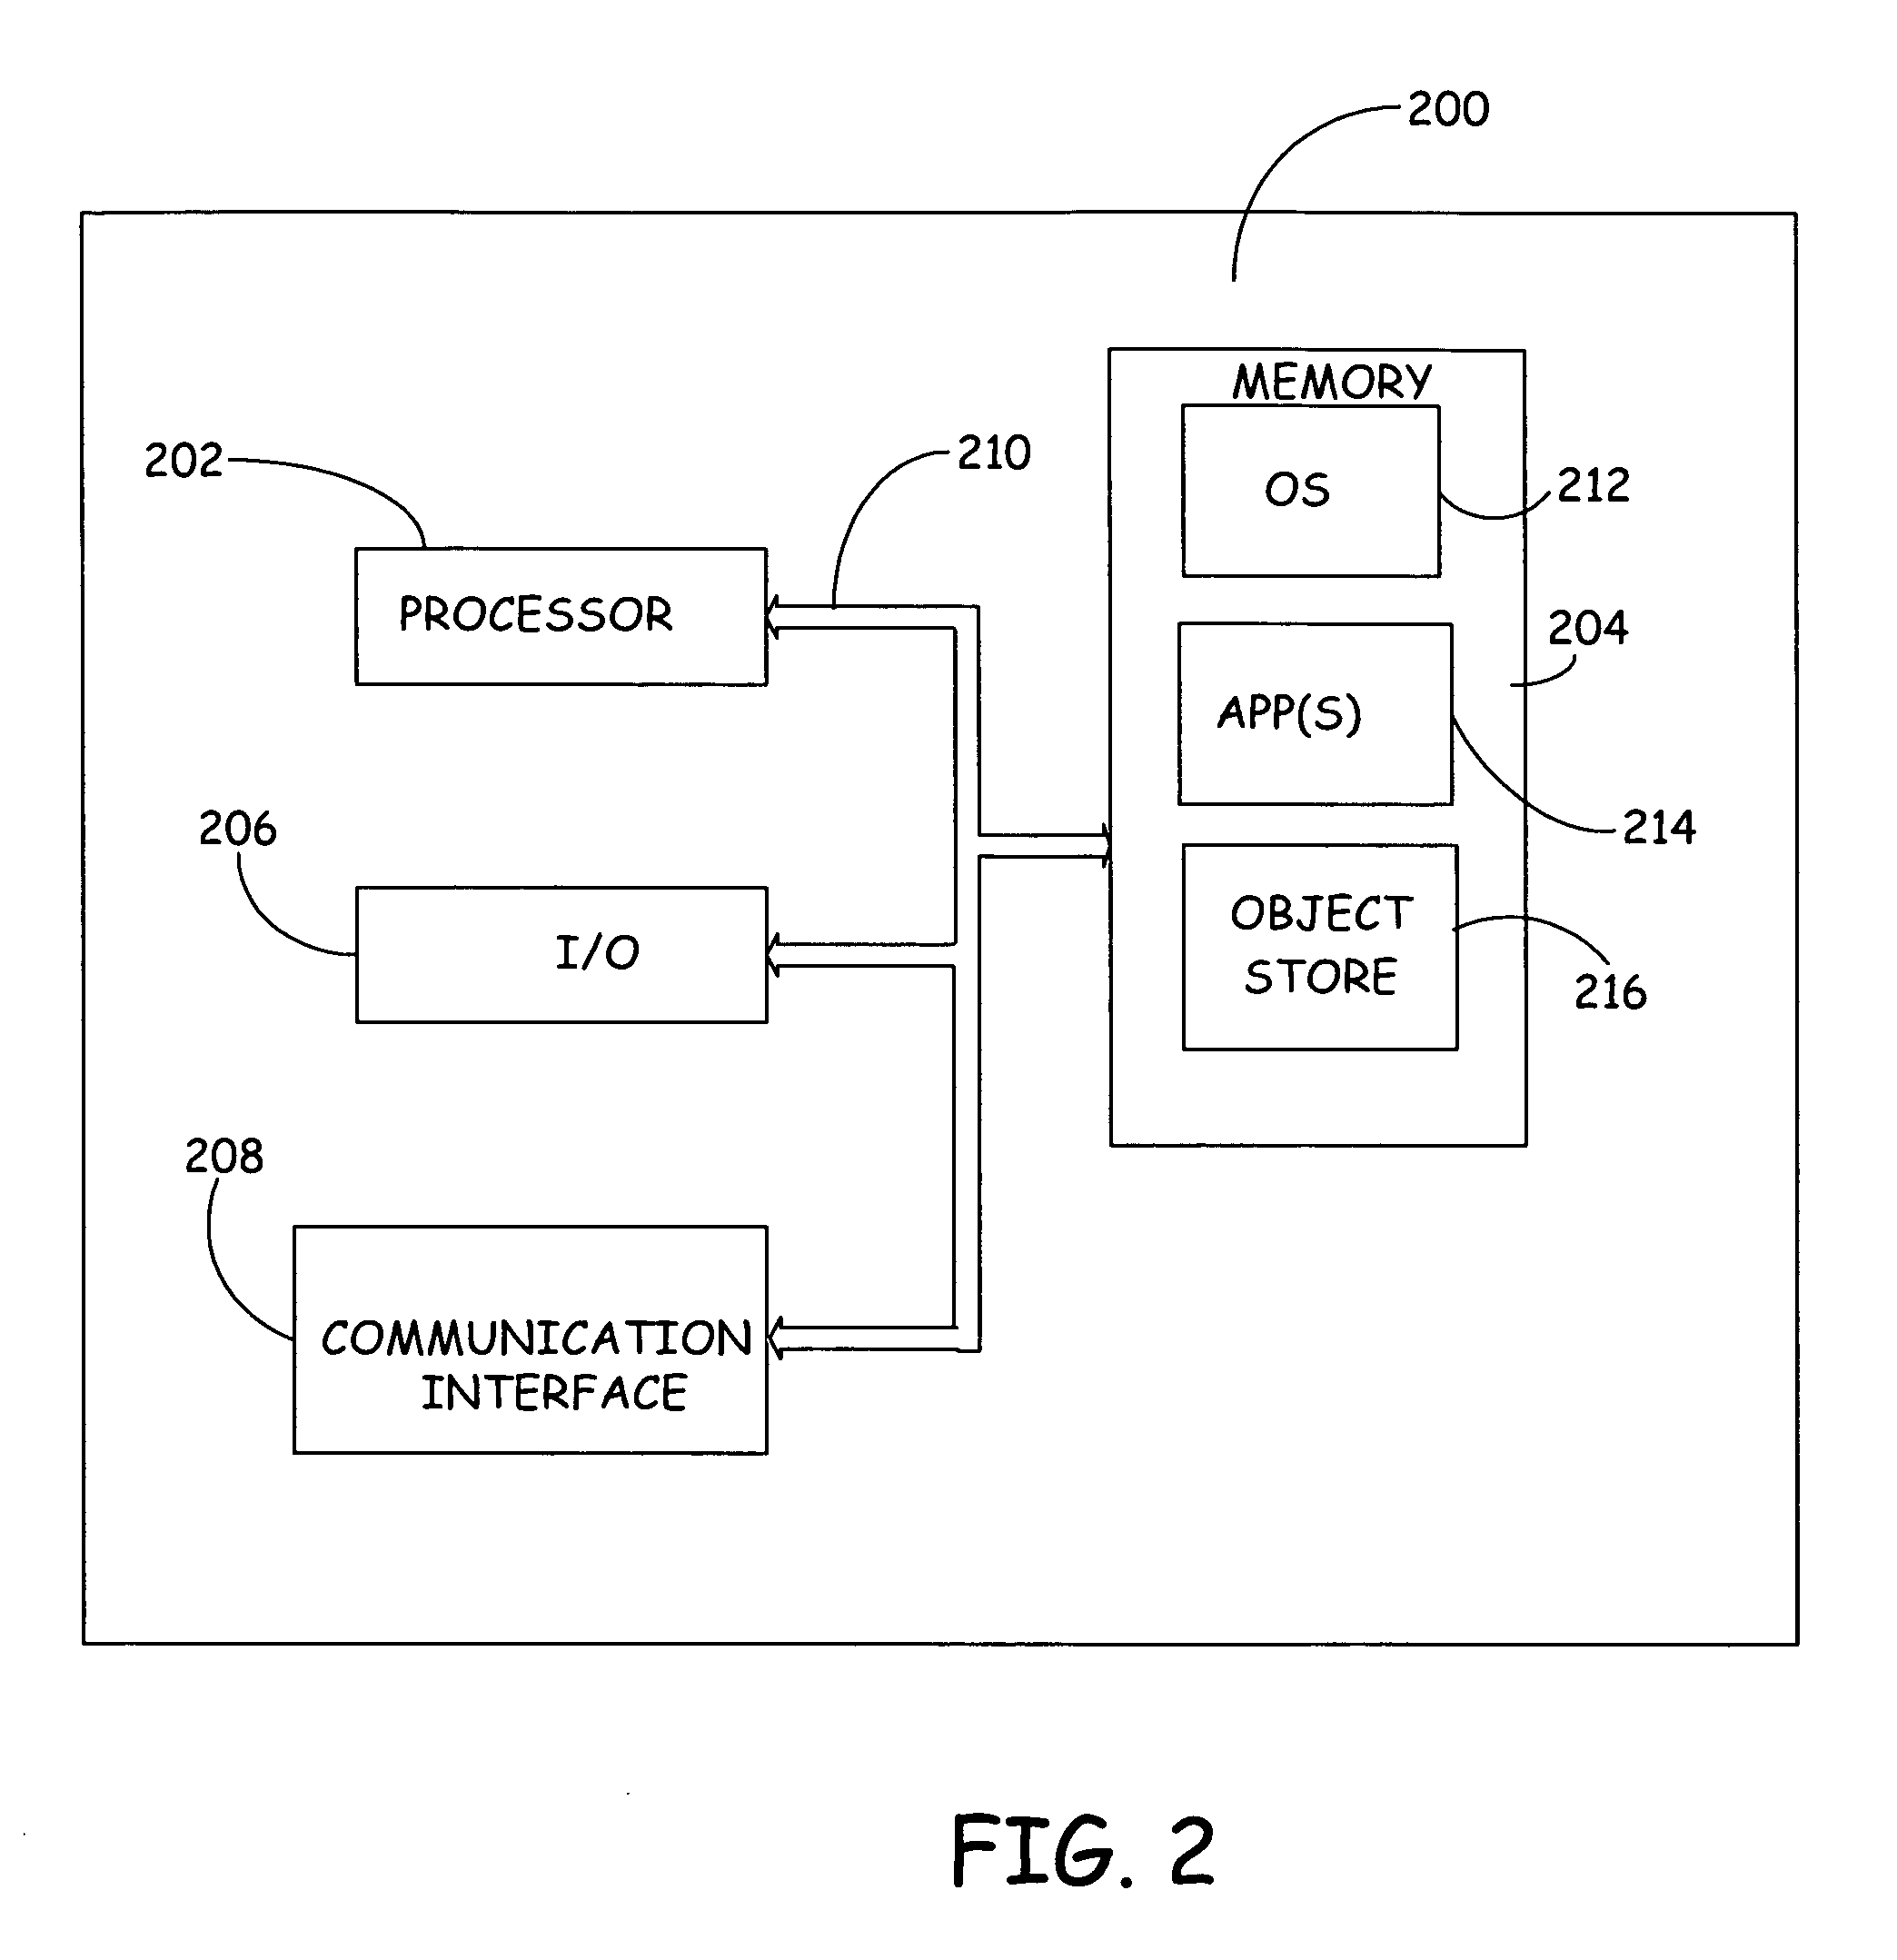 Test display module for testing application logic independent of specific user interface platforms